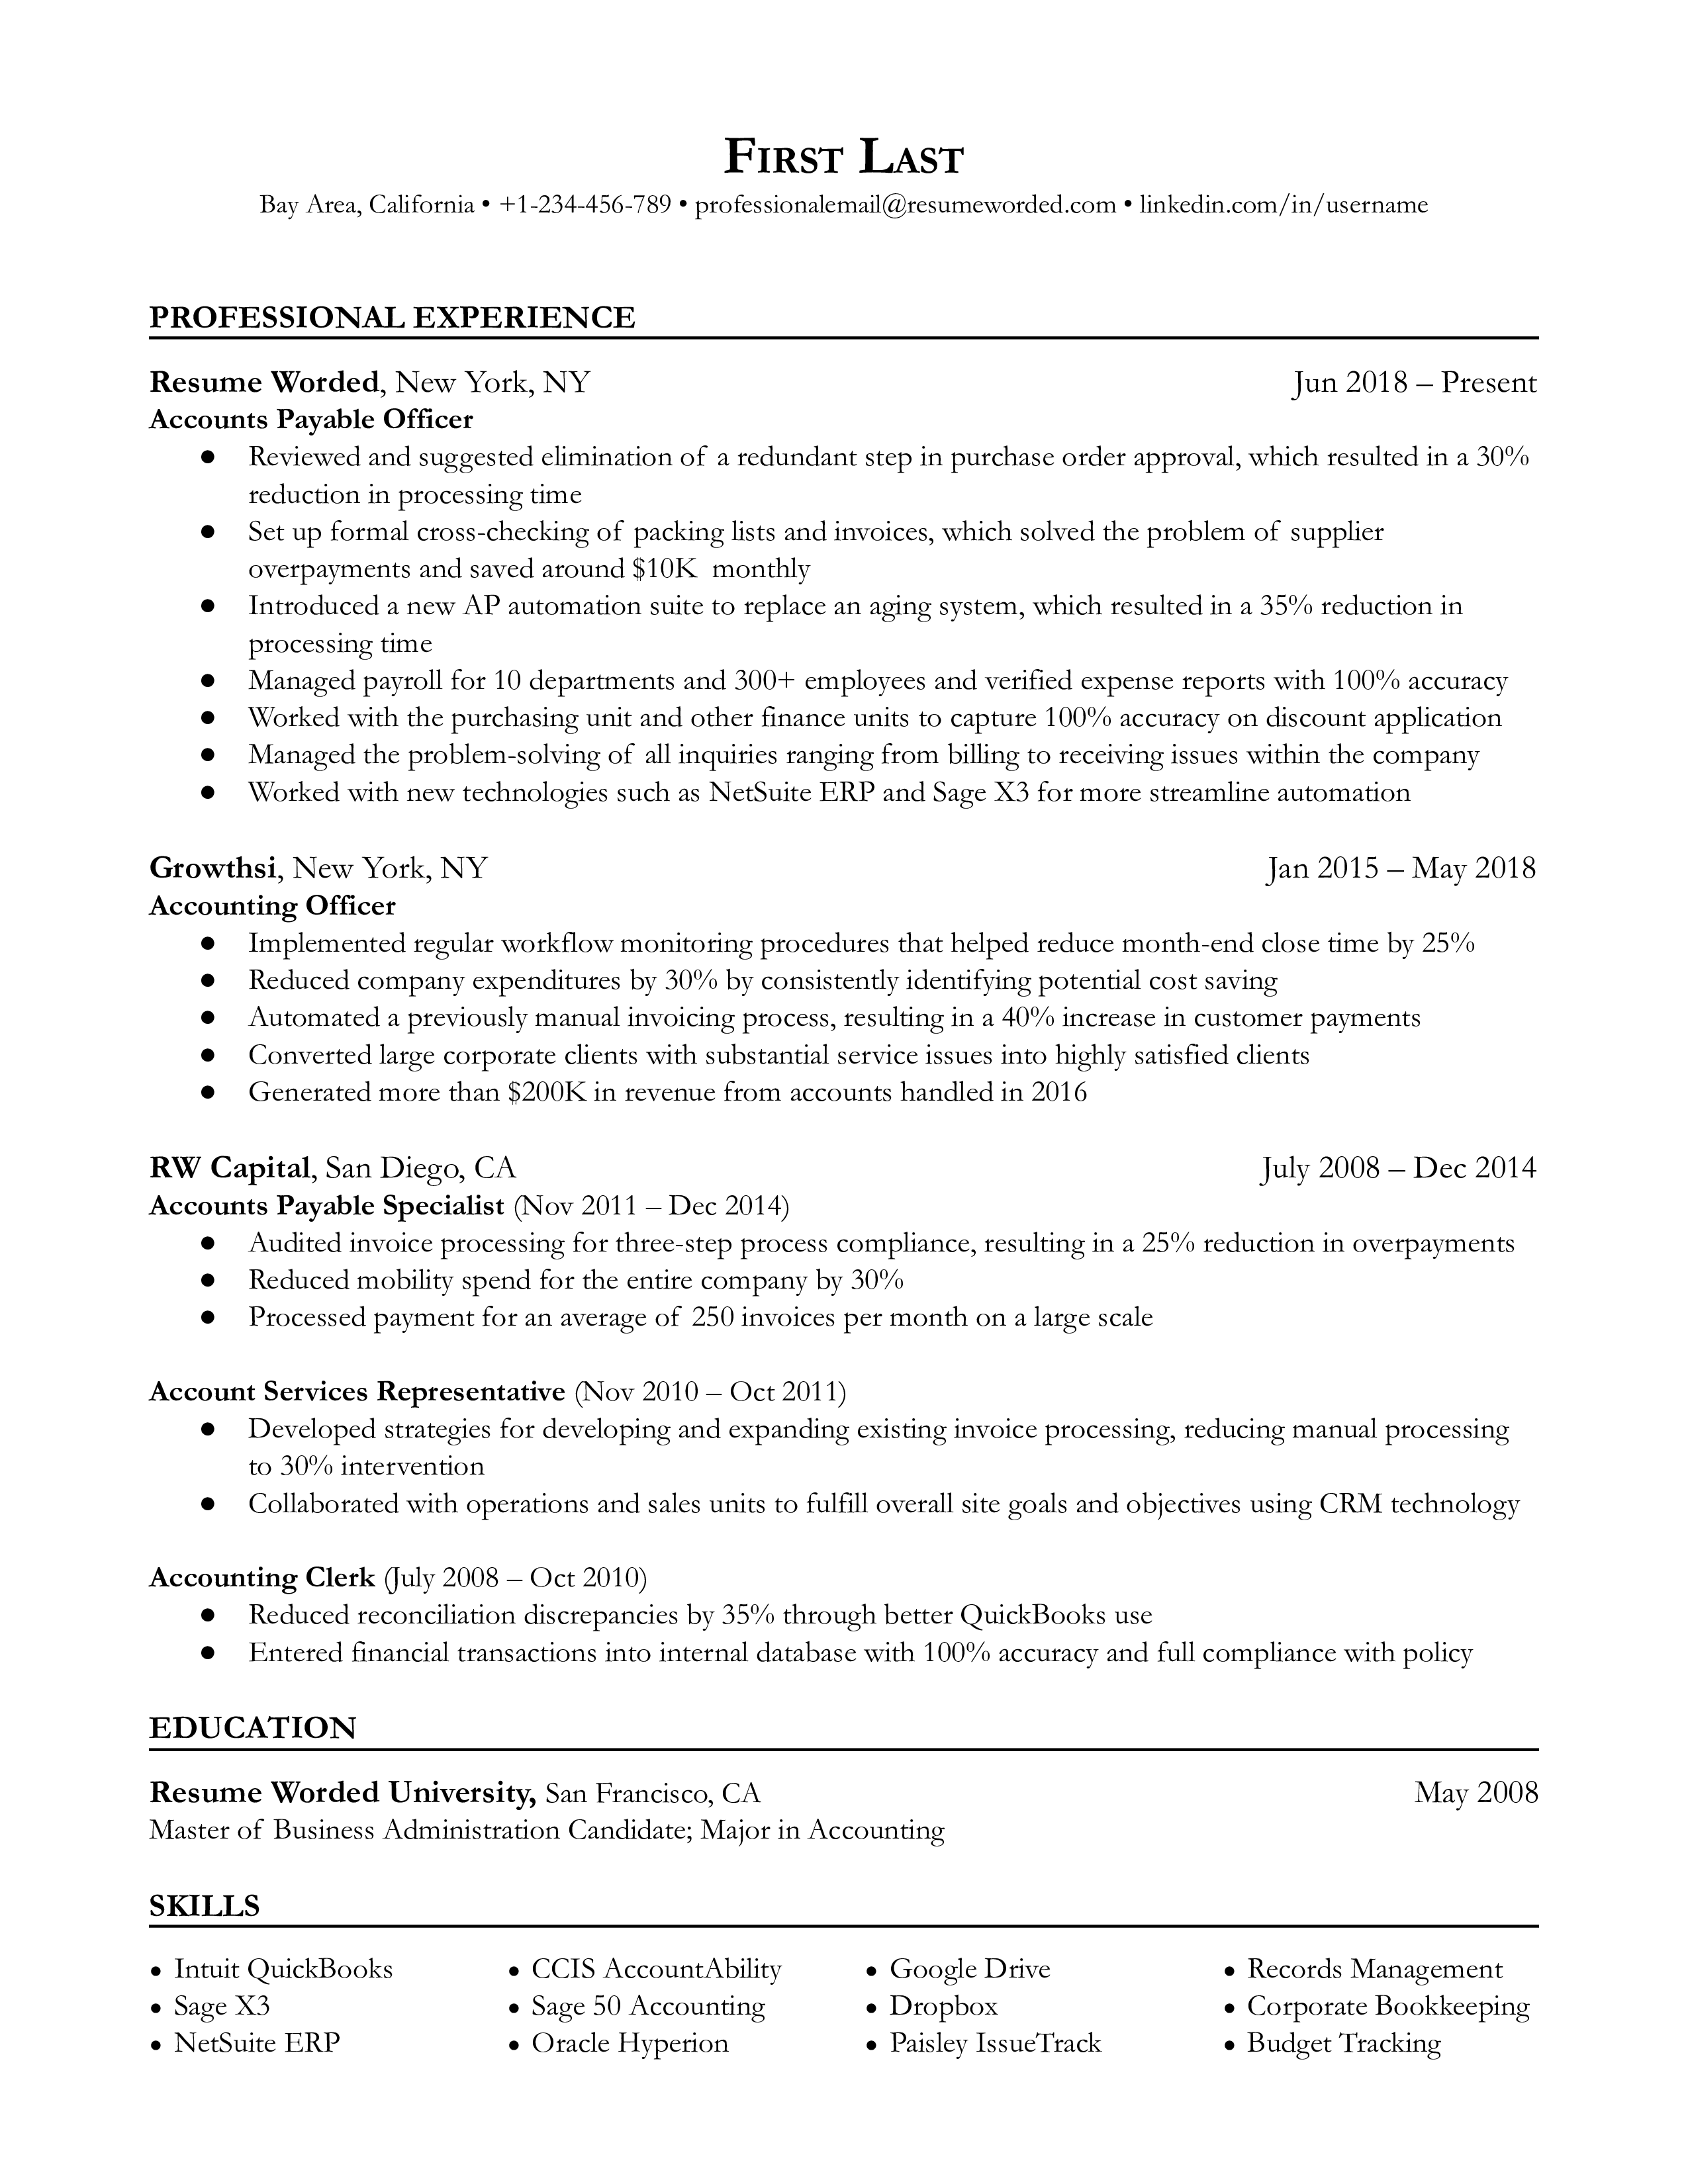 An accounts payable officer resume template example is shown which can be used to inspire your own resume in the career.